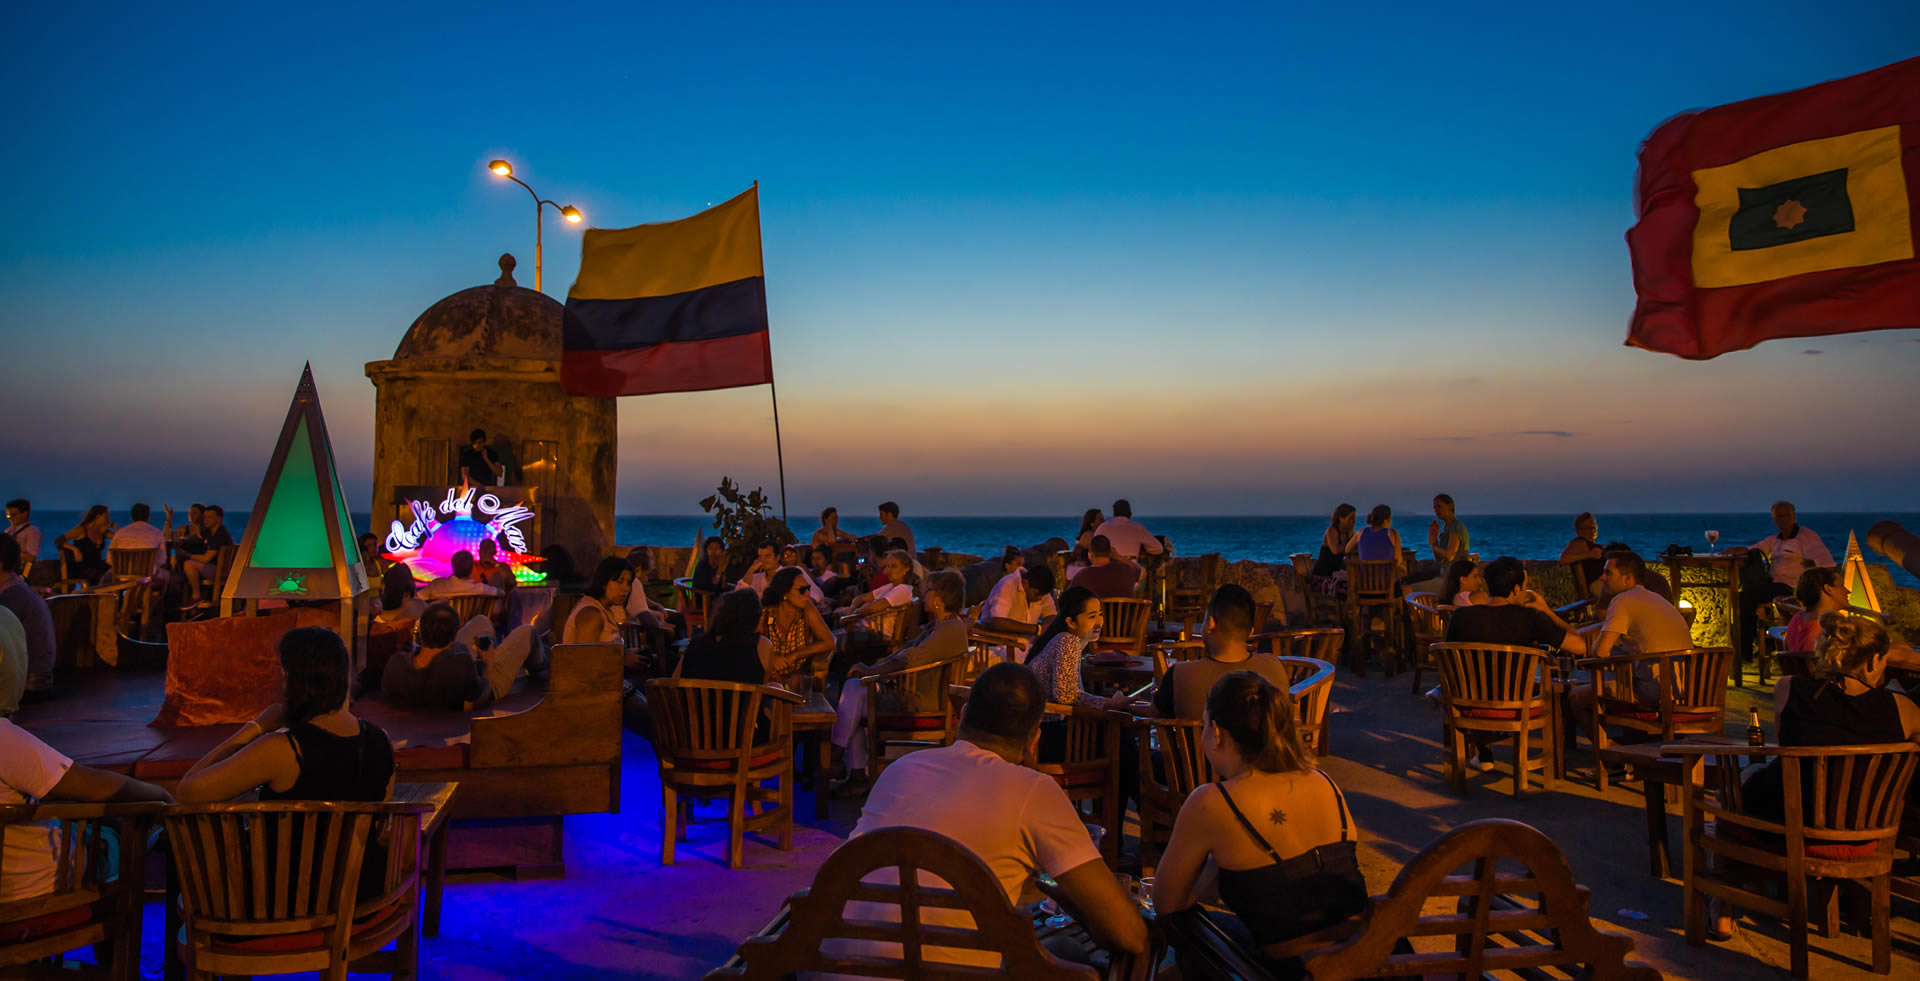 Кафе дельмар. Cafe del Mar Ибица фото. Cafe del Mar бар.